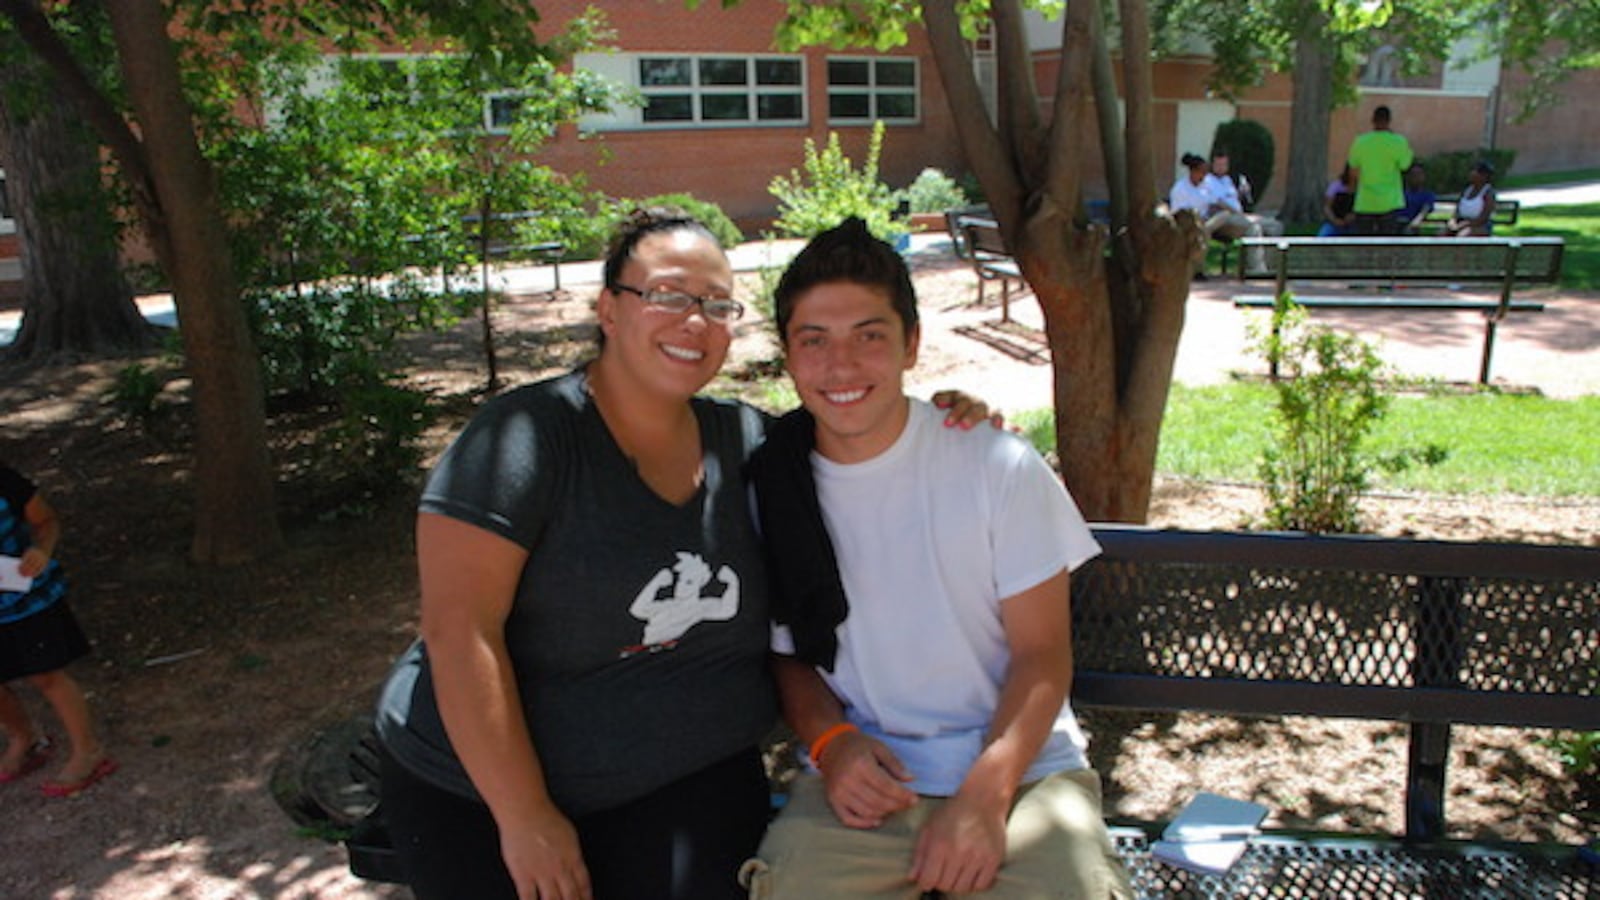 Jen and Jeremiah Strasheim on the last day of Manual's freshman academy. He will be a freshman at the school this fall.